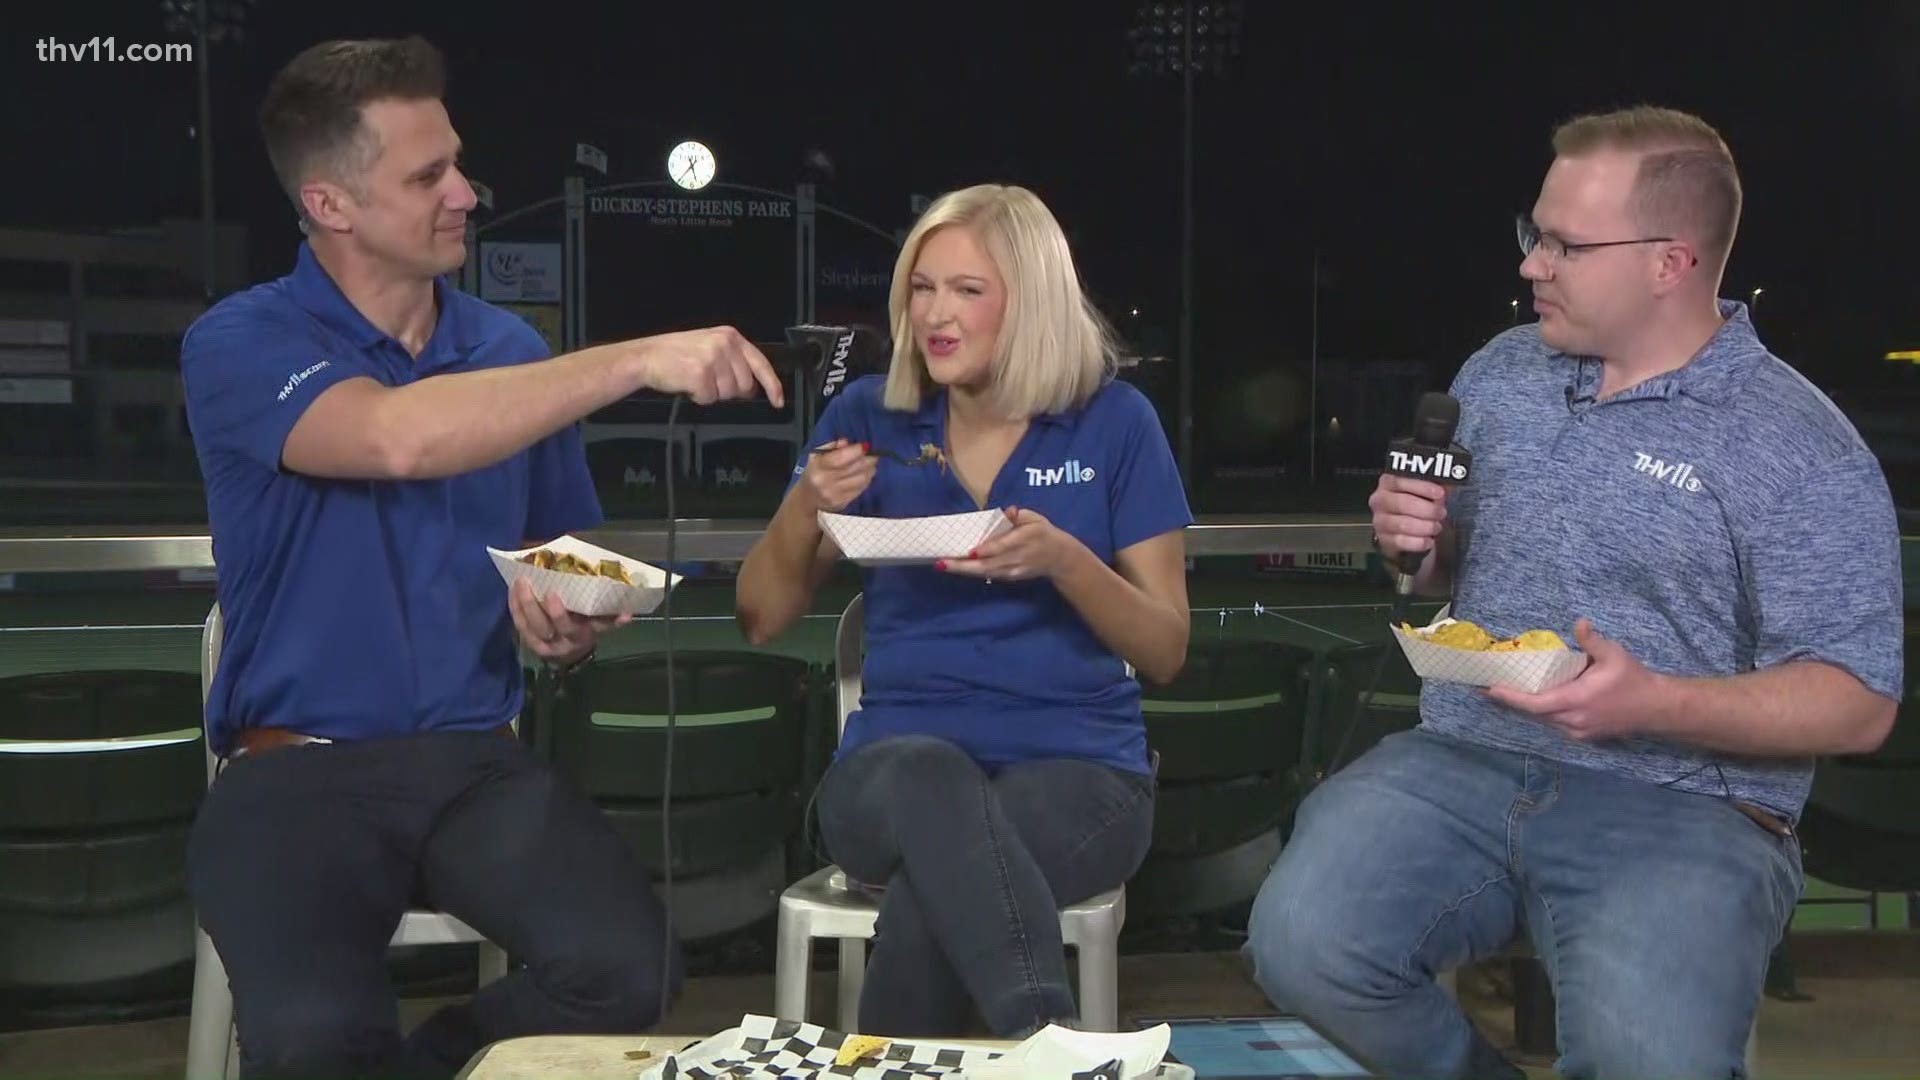 Amanda, Rob, and Skot try out the barbecue nachos at Dickey Stephens Park ahead of the Arkansas Travelers game.